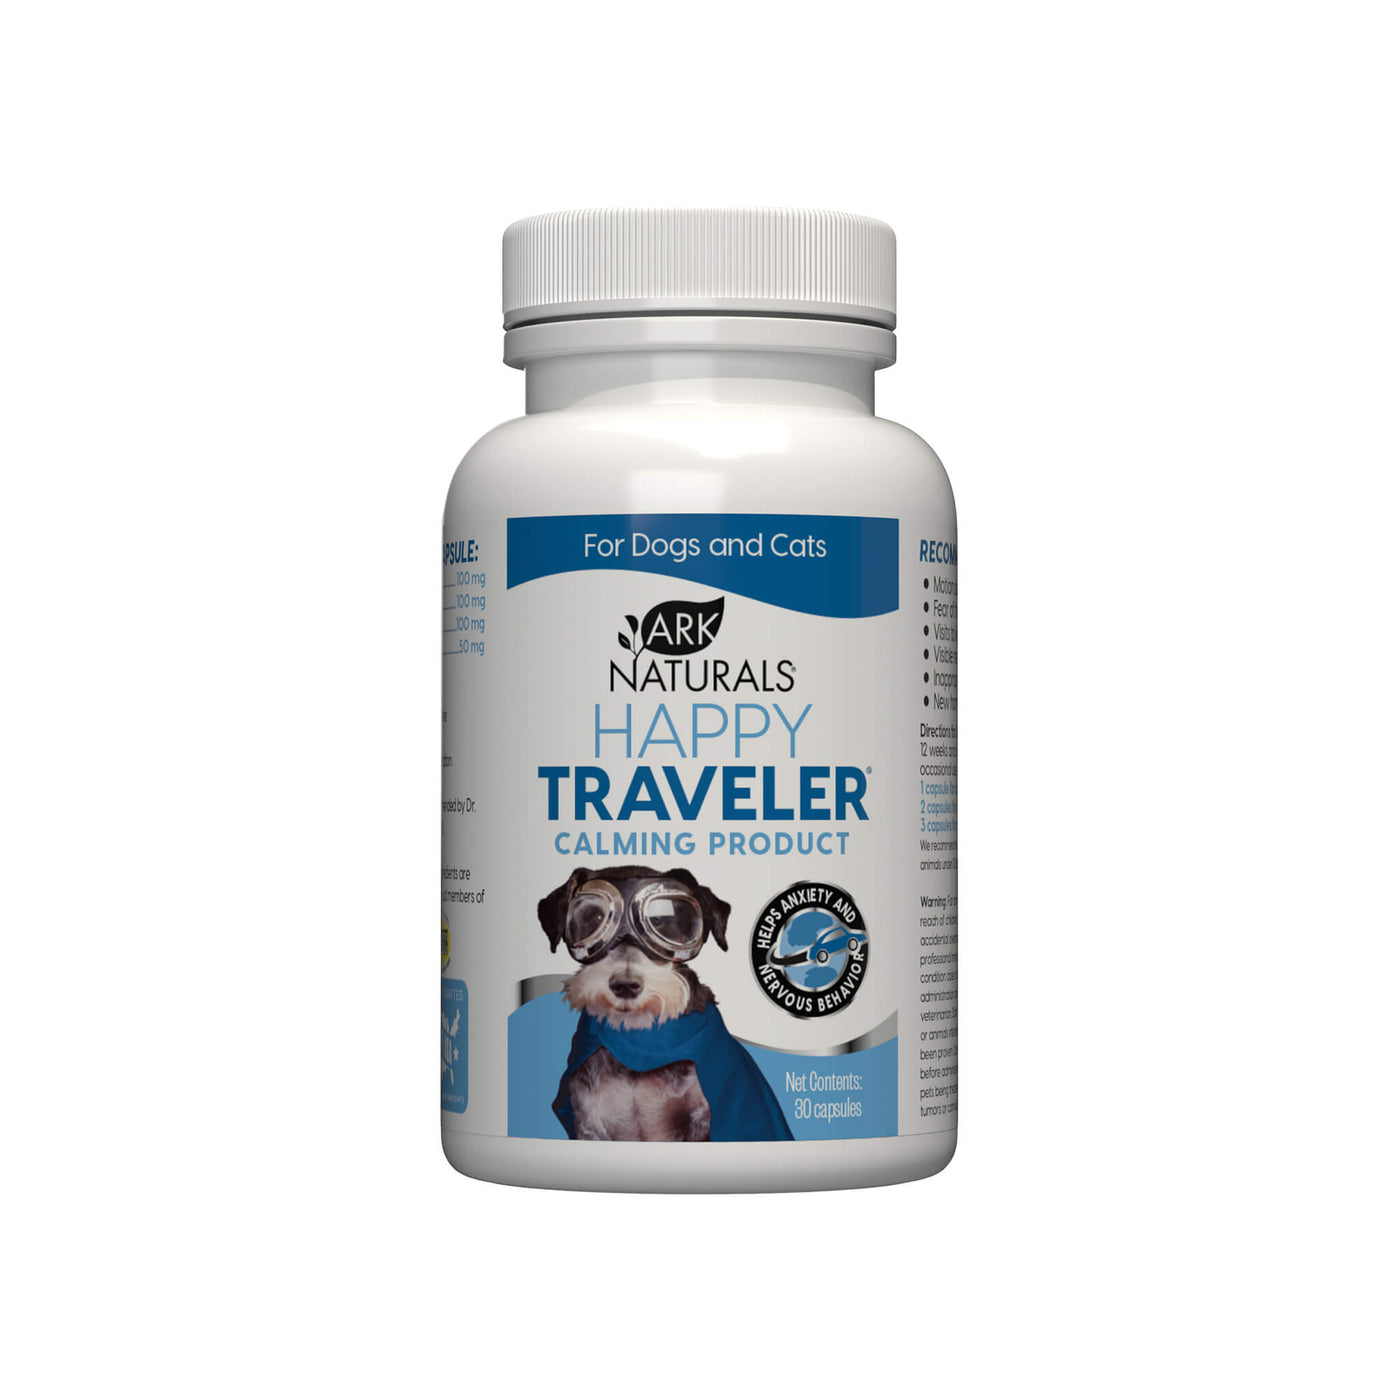 is 500 mg of valerian root safe for dogs